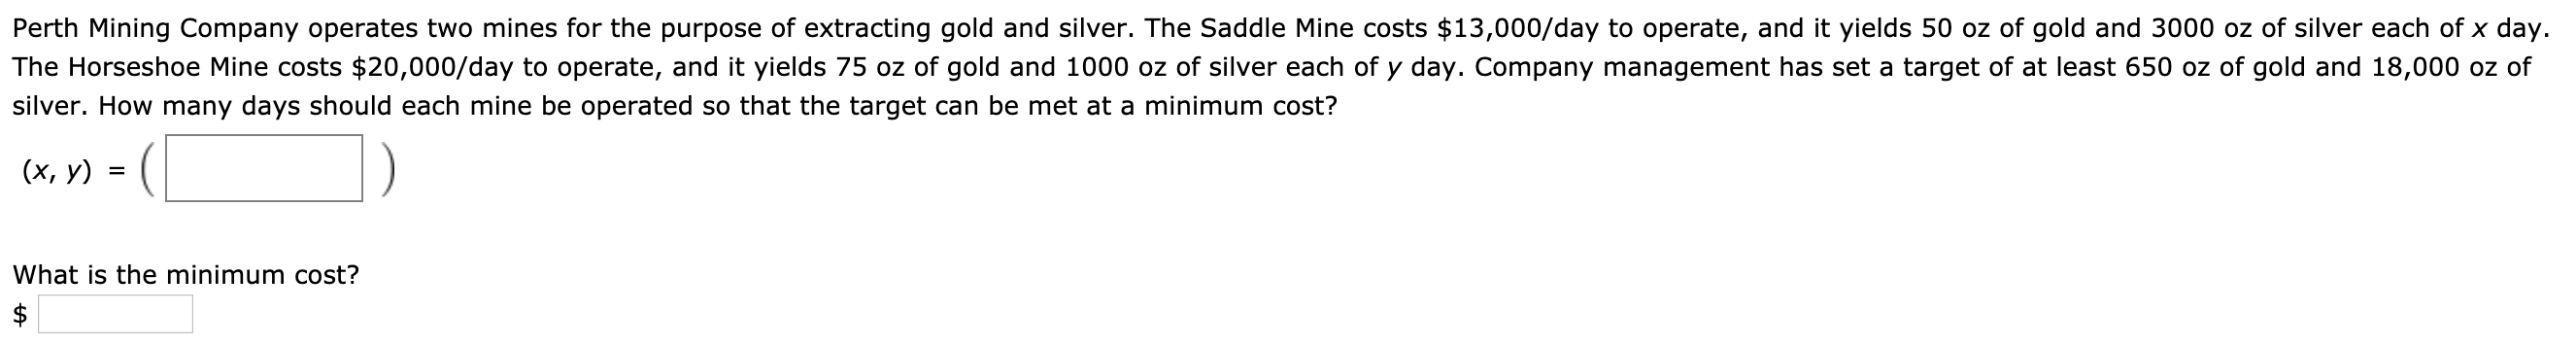 Perth Mining Company operates two mines for the purpose of extracting gold and silver. The Saddle Mine costs $13,000/day to operate, and it yields 50 oz of gold and 3000 oz of silver each of x day.
The Horseshoe Mine costs $20,000/day to operate, and it yields 75 oz of gold and 1000 oz of silver each of y day. Company management has set a target of at least 650 oz of gold and 18,000 oz of
silver. How many days should each mine be operated so that the target can be met at a minimum cost?
(х, у)
What is the minimum cost?
